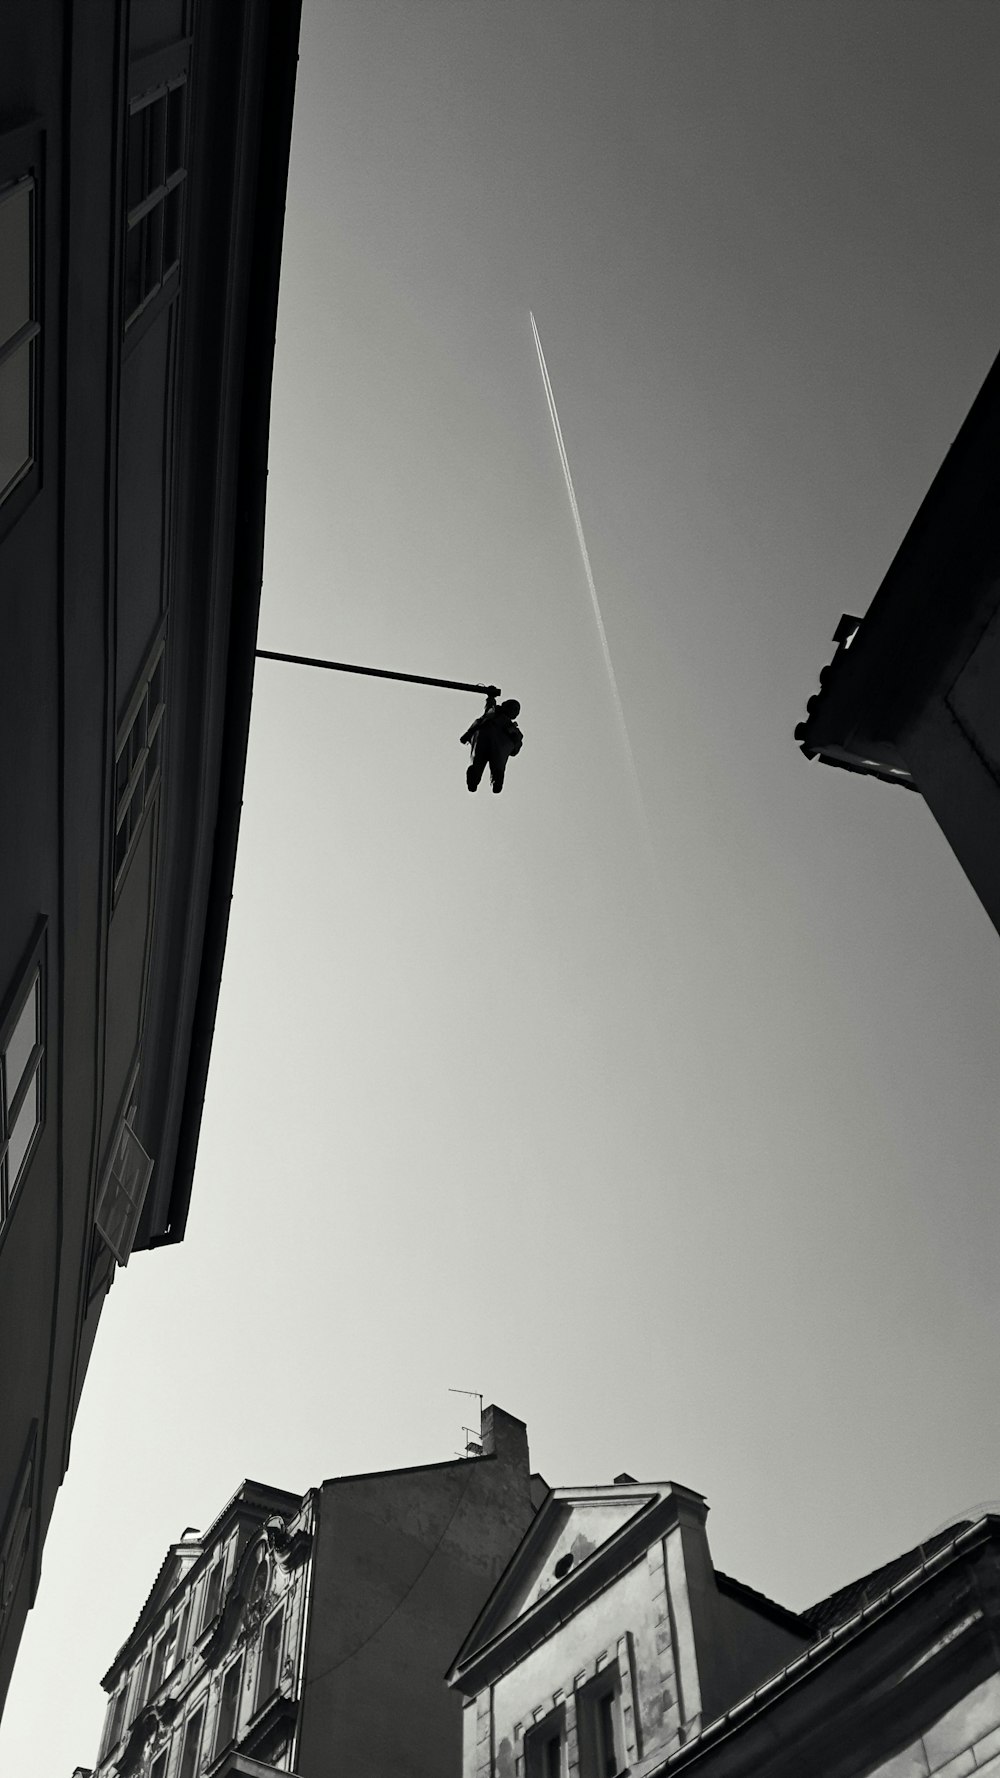 grayscale photography of person hanging on edge of rooftop